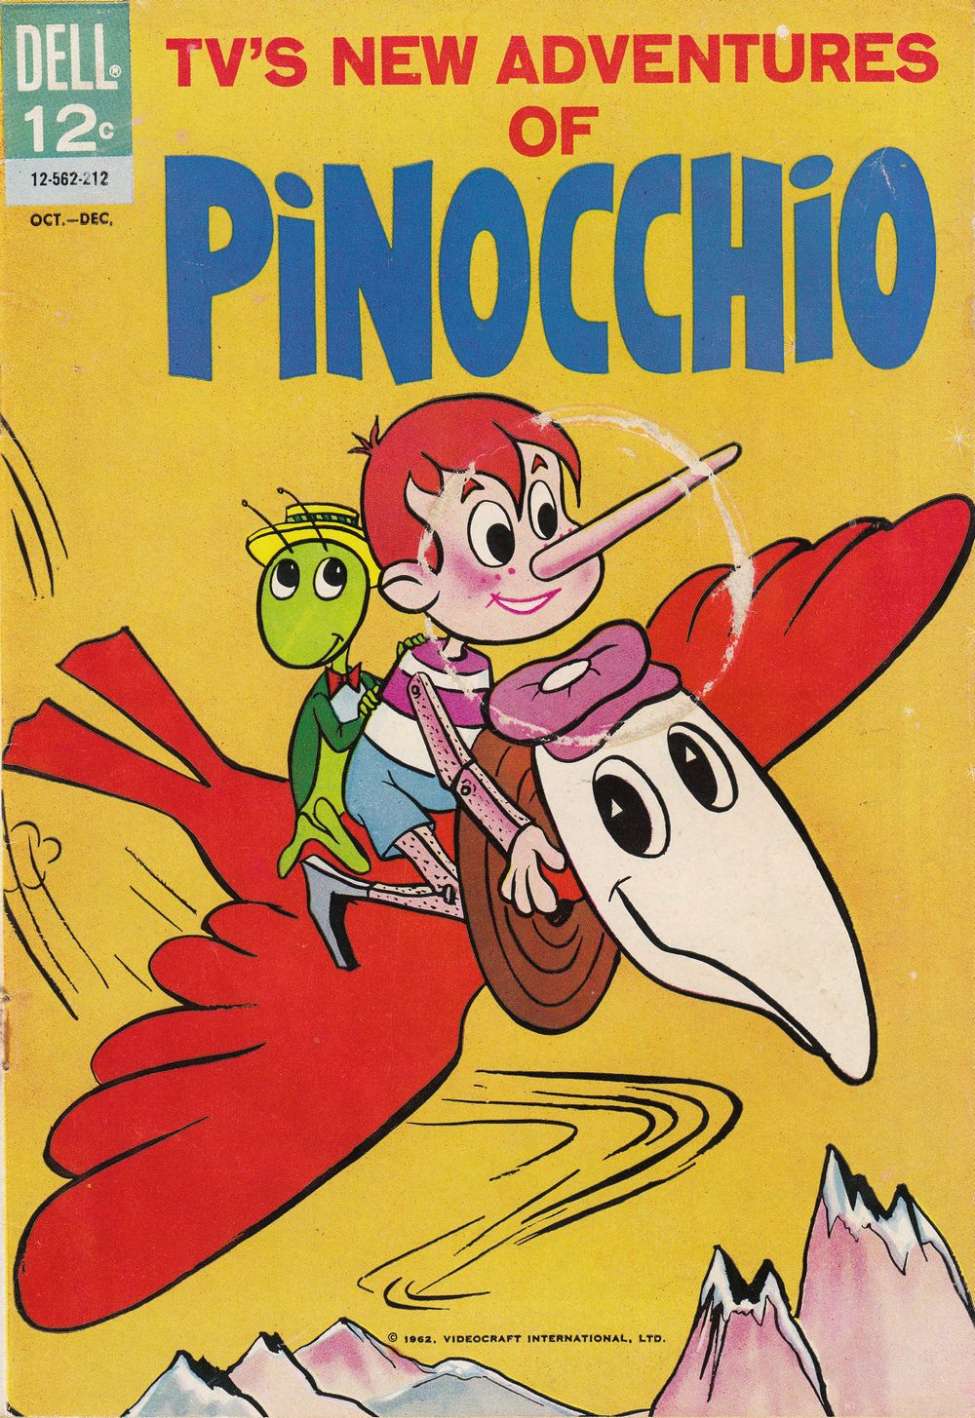 Book Cover For New Adventures of Pinocchio 1